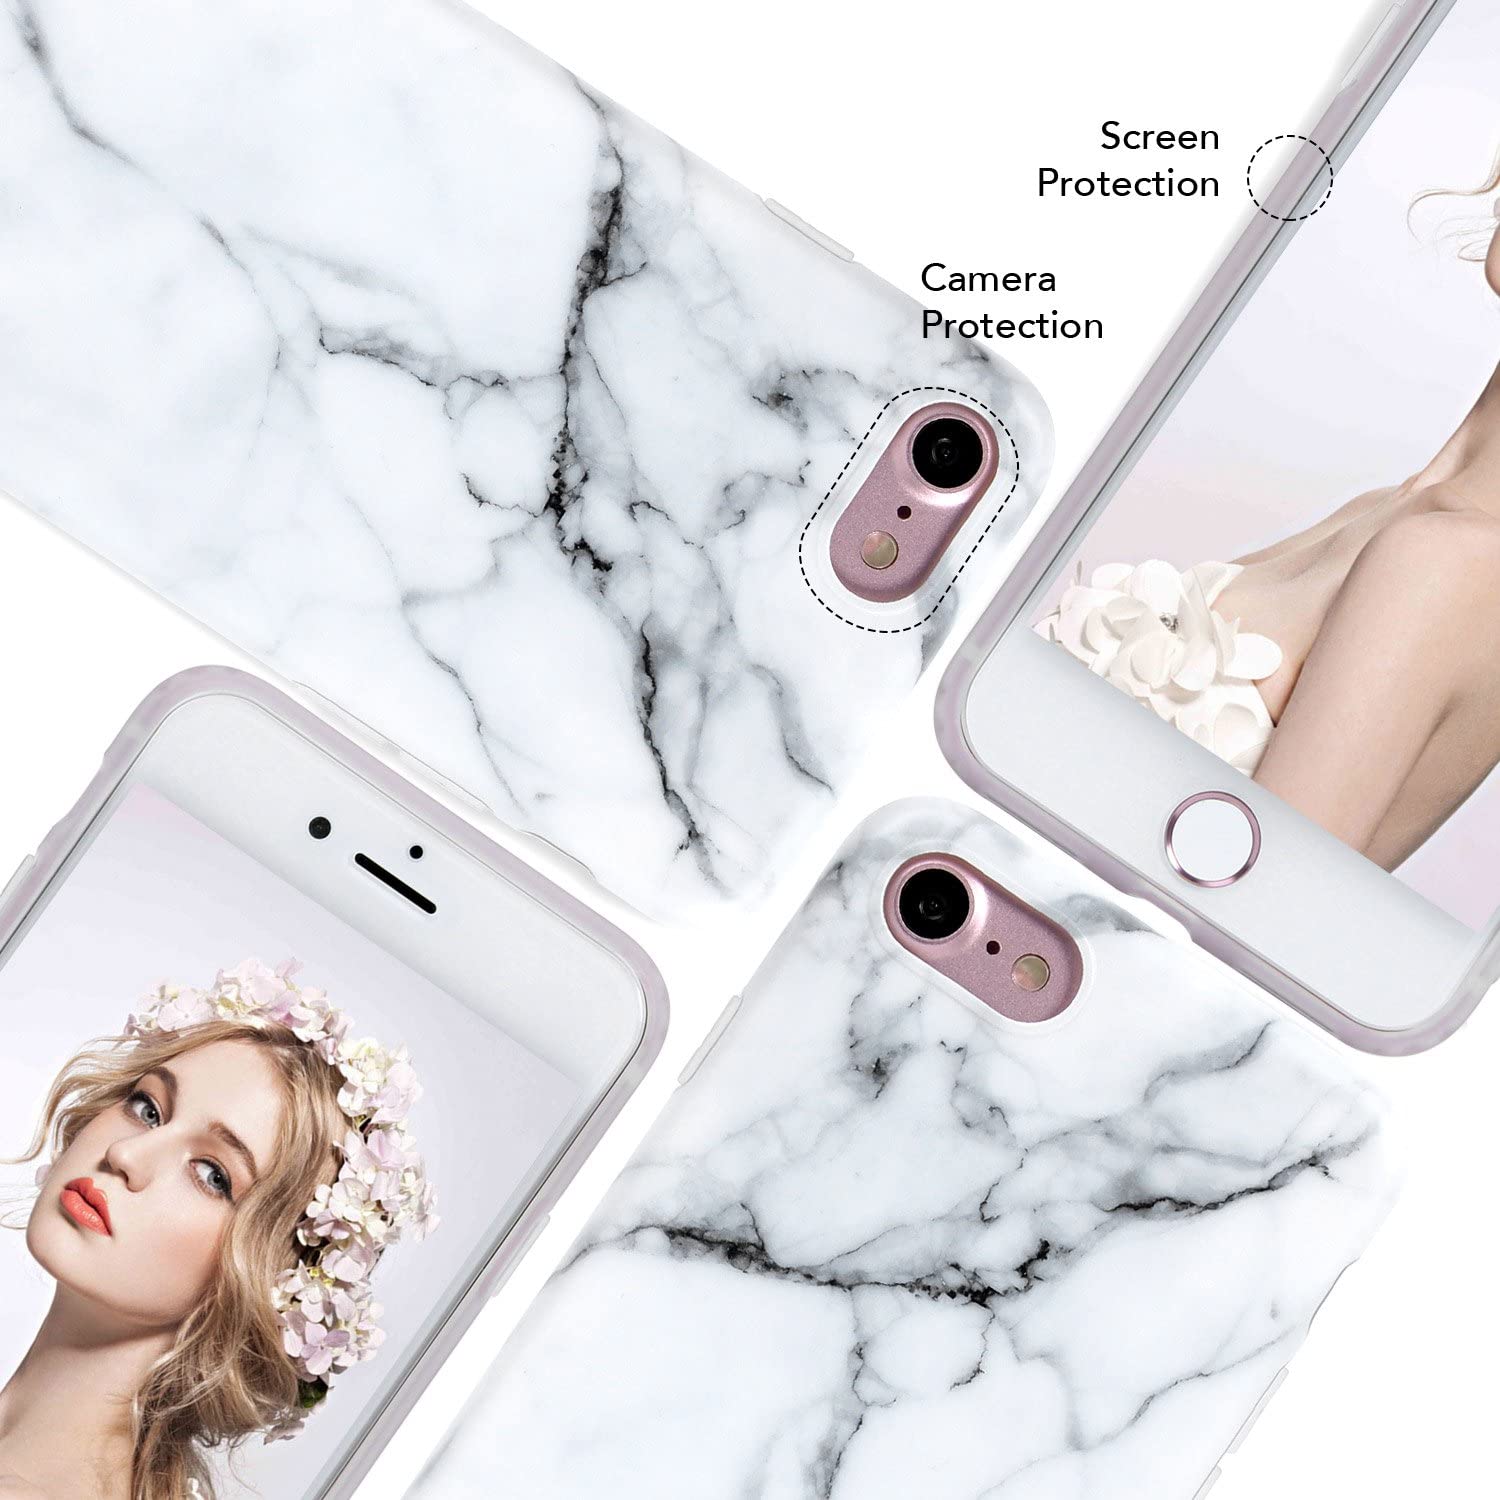 Apple iPhone 8 Plus Case White Marble Slim Anti-Scratch Shockproof Cover Glossy Flexible Clear Transparent TPU Soft Case